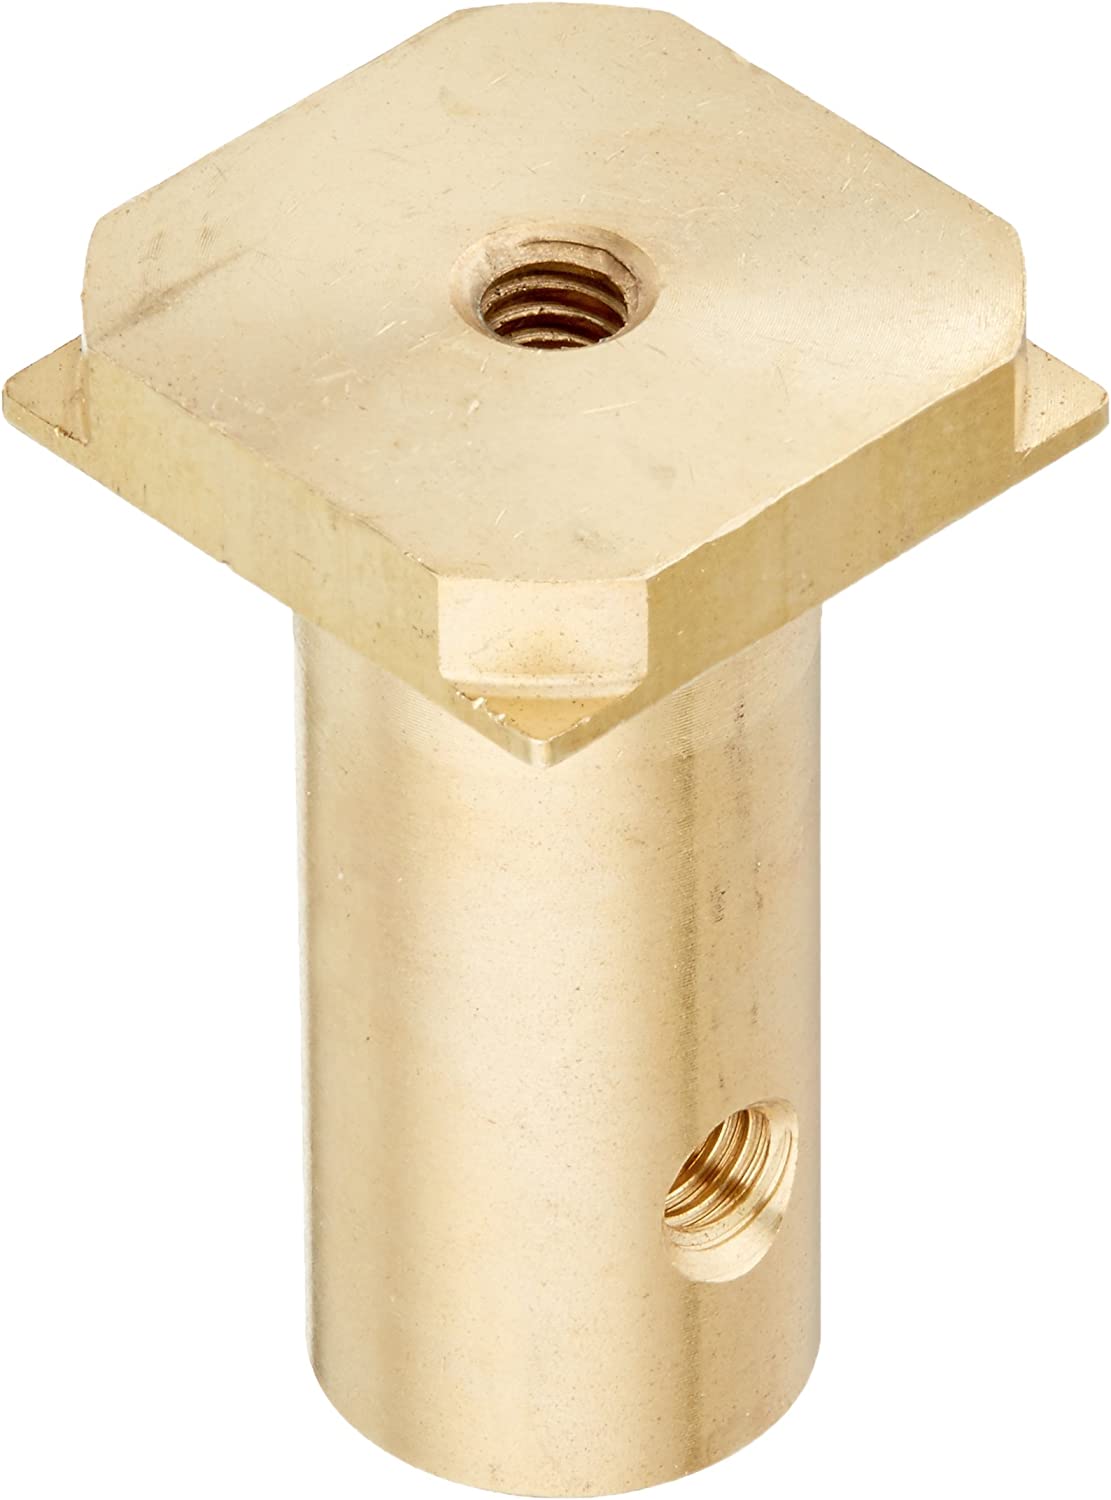 Pentair 072427 Noryl Diverter Shaft Replacement Pool and Spa Valve